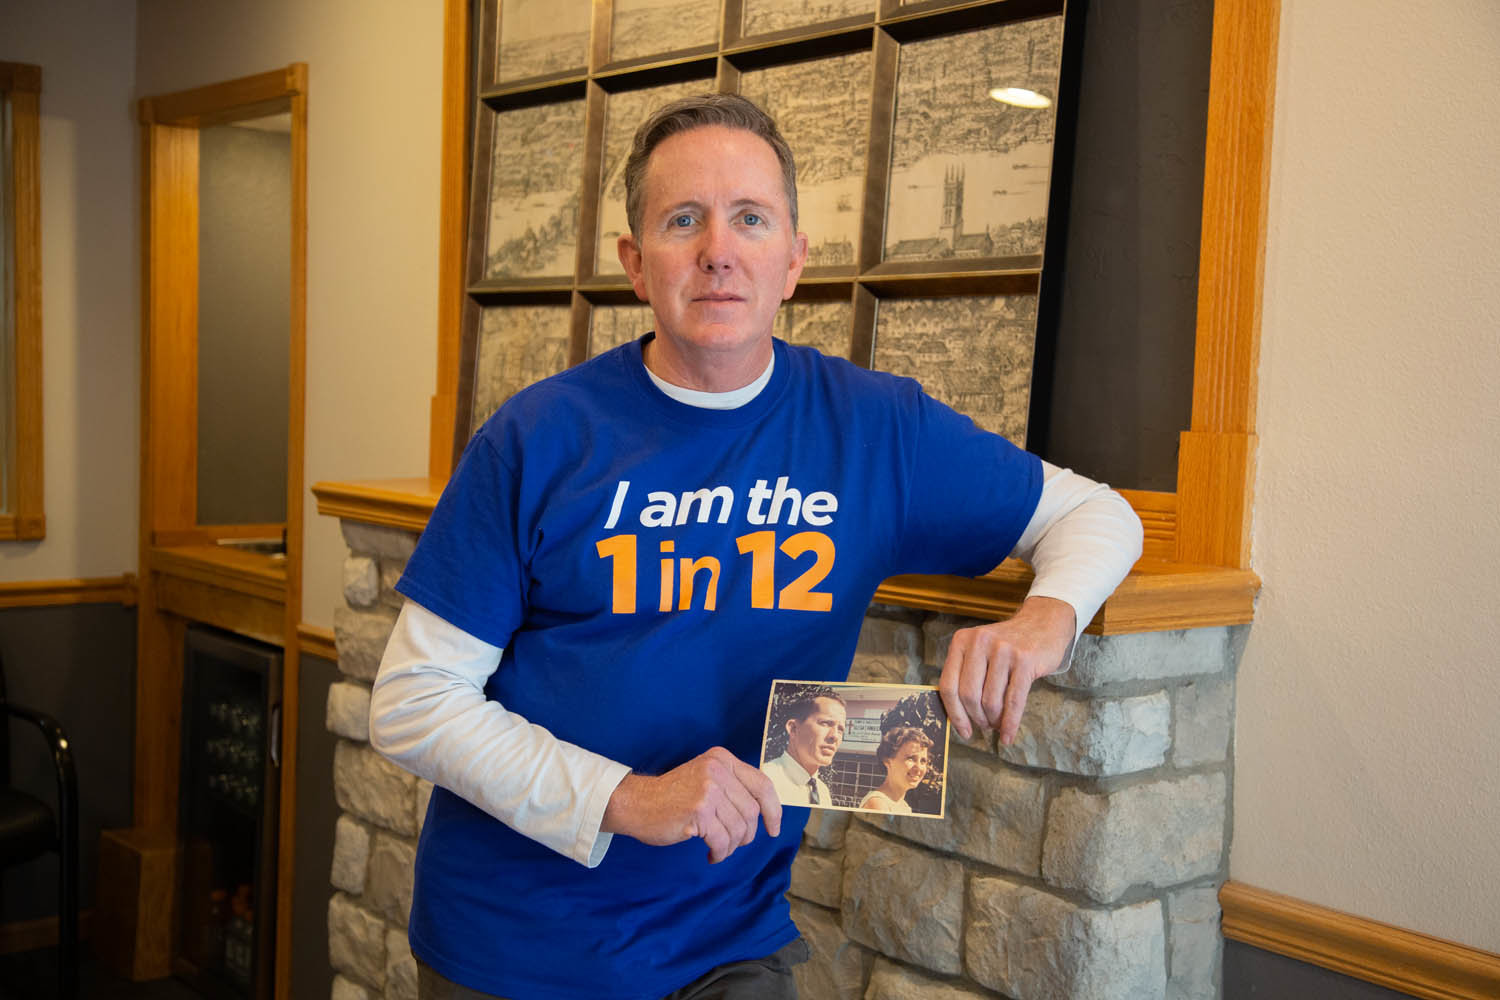 David Potter says after his parents were murdered when he was 10 years old, a place like Lost & Found Grief Center would have helped him work through his pain. That’s why he’s supporting the nonprofit today through the 1 in 12 campaign.